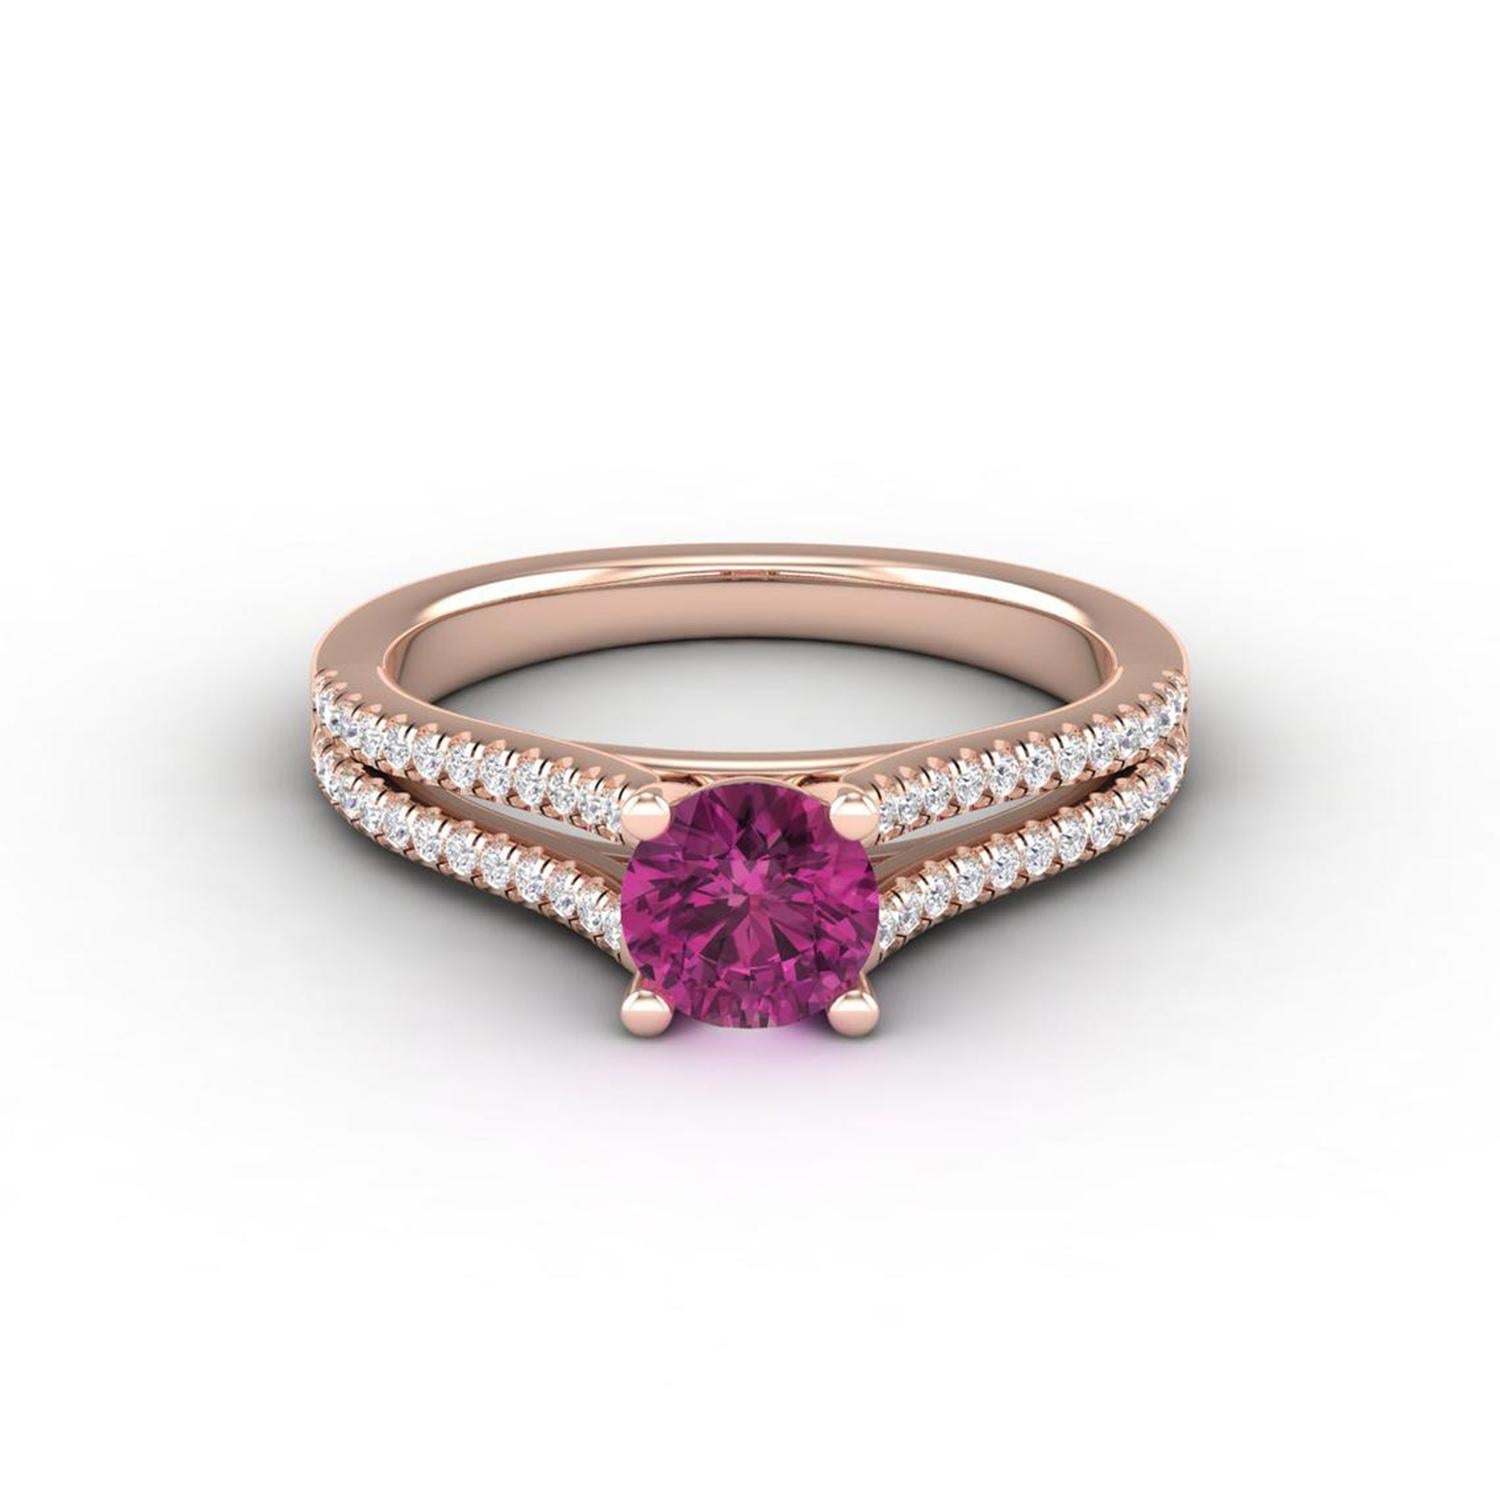 14 K Gold Rubellite Tourmaline Ring / Diamond Solitaire Ring / Ring for Her For Sale 1